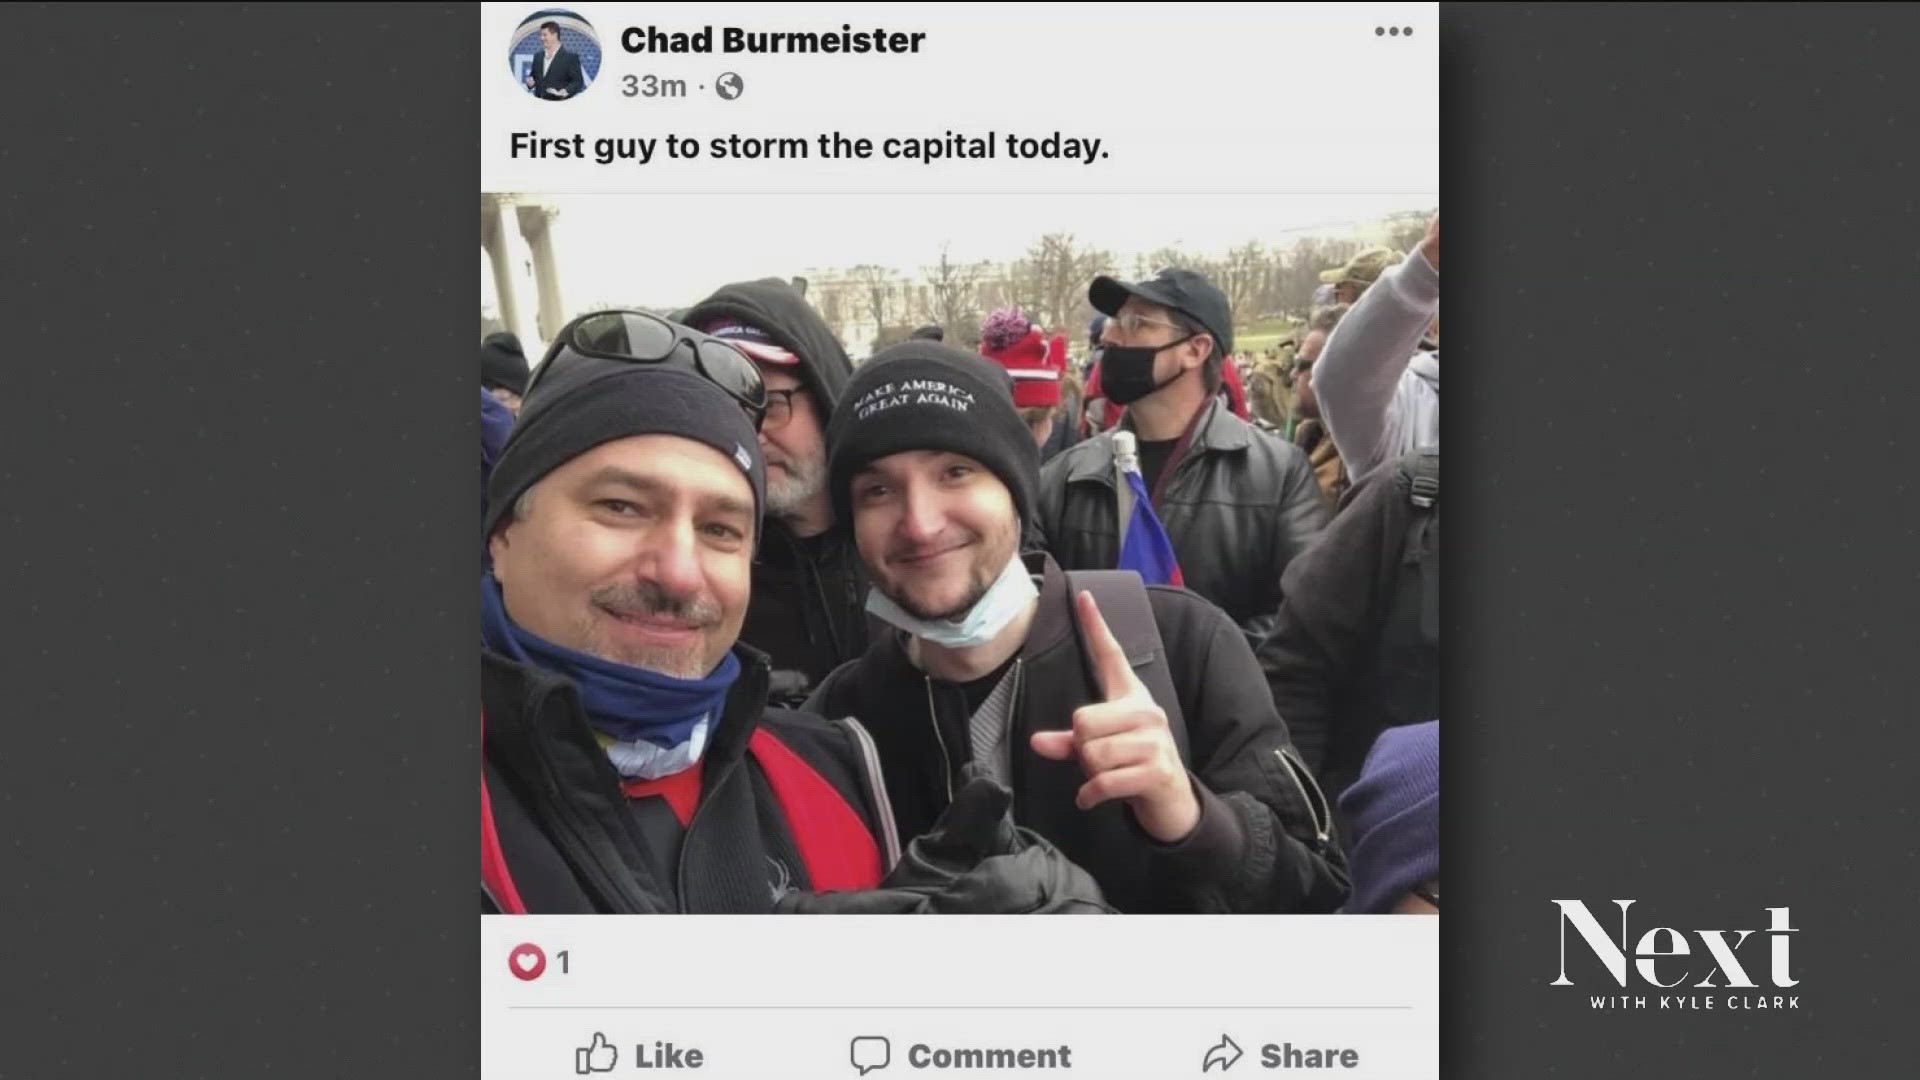 The photo of Chad Burmeister and now-arrested Kenneth Shulz was noted by the Feds in a court filing to have helped identify Shulz's presence at the Capitol on Jan. 6